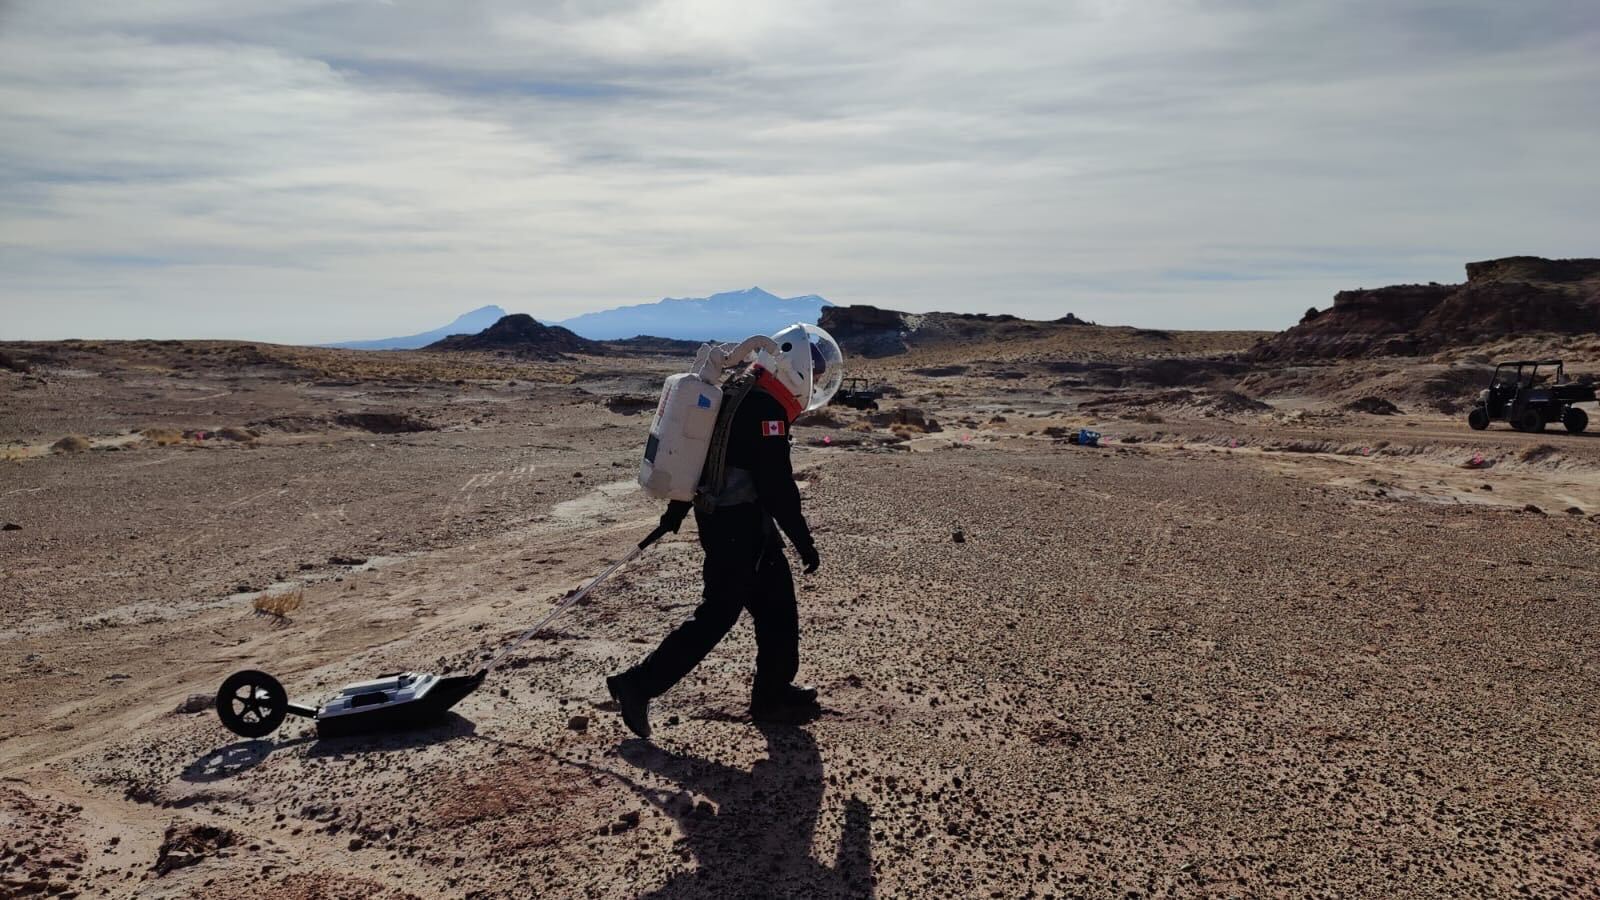 450 MHz radar collecting data in Utah during an analog astronaut mission